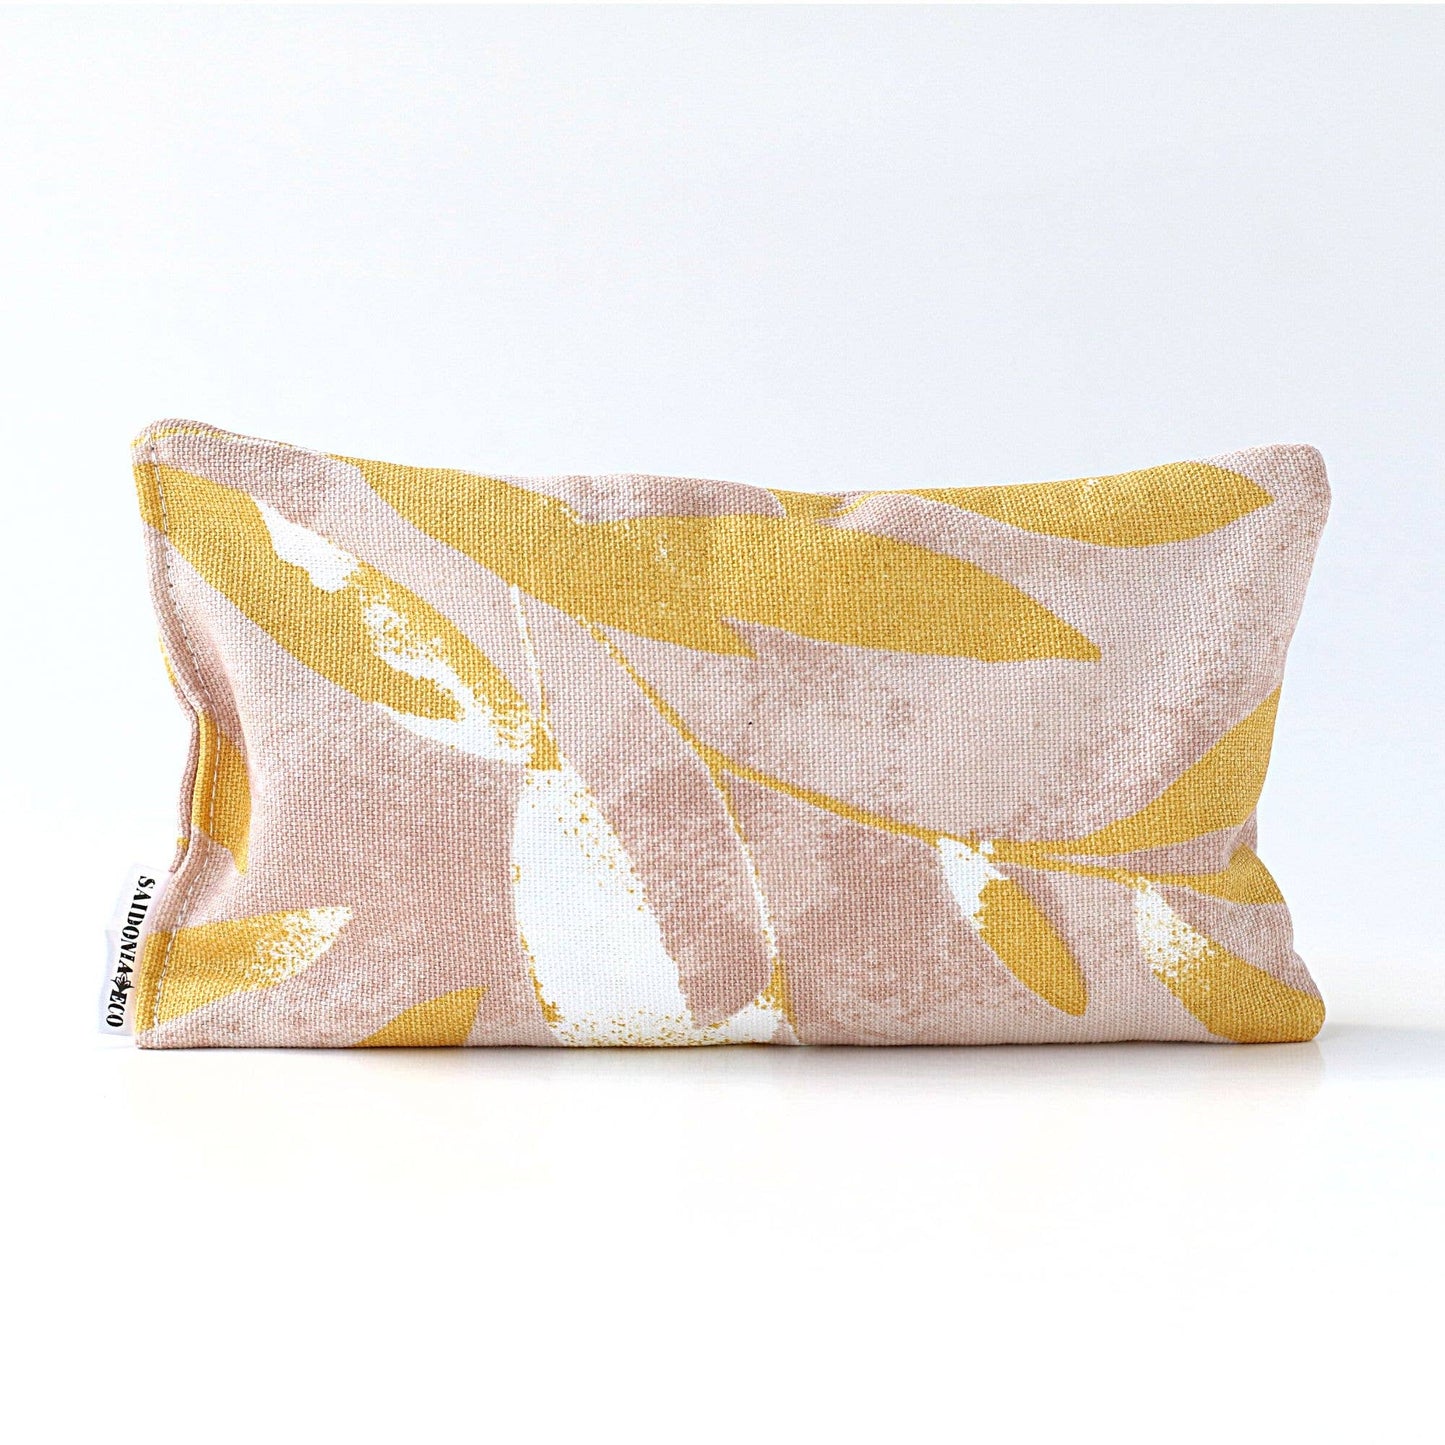 Weighted Aromatherapy Eye Pillow - Golden Leaf